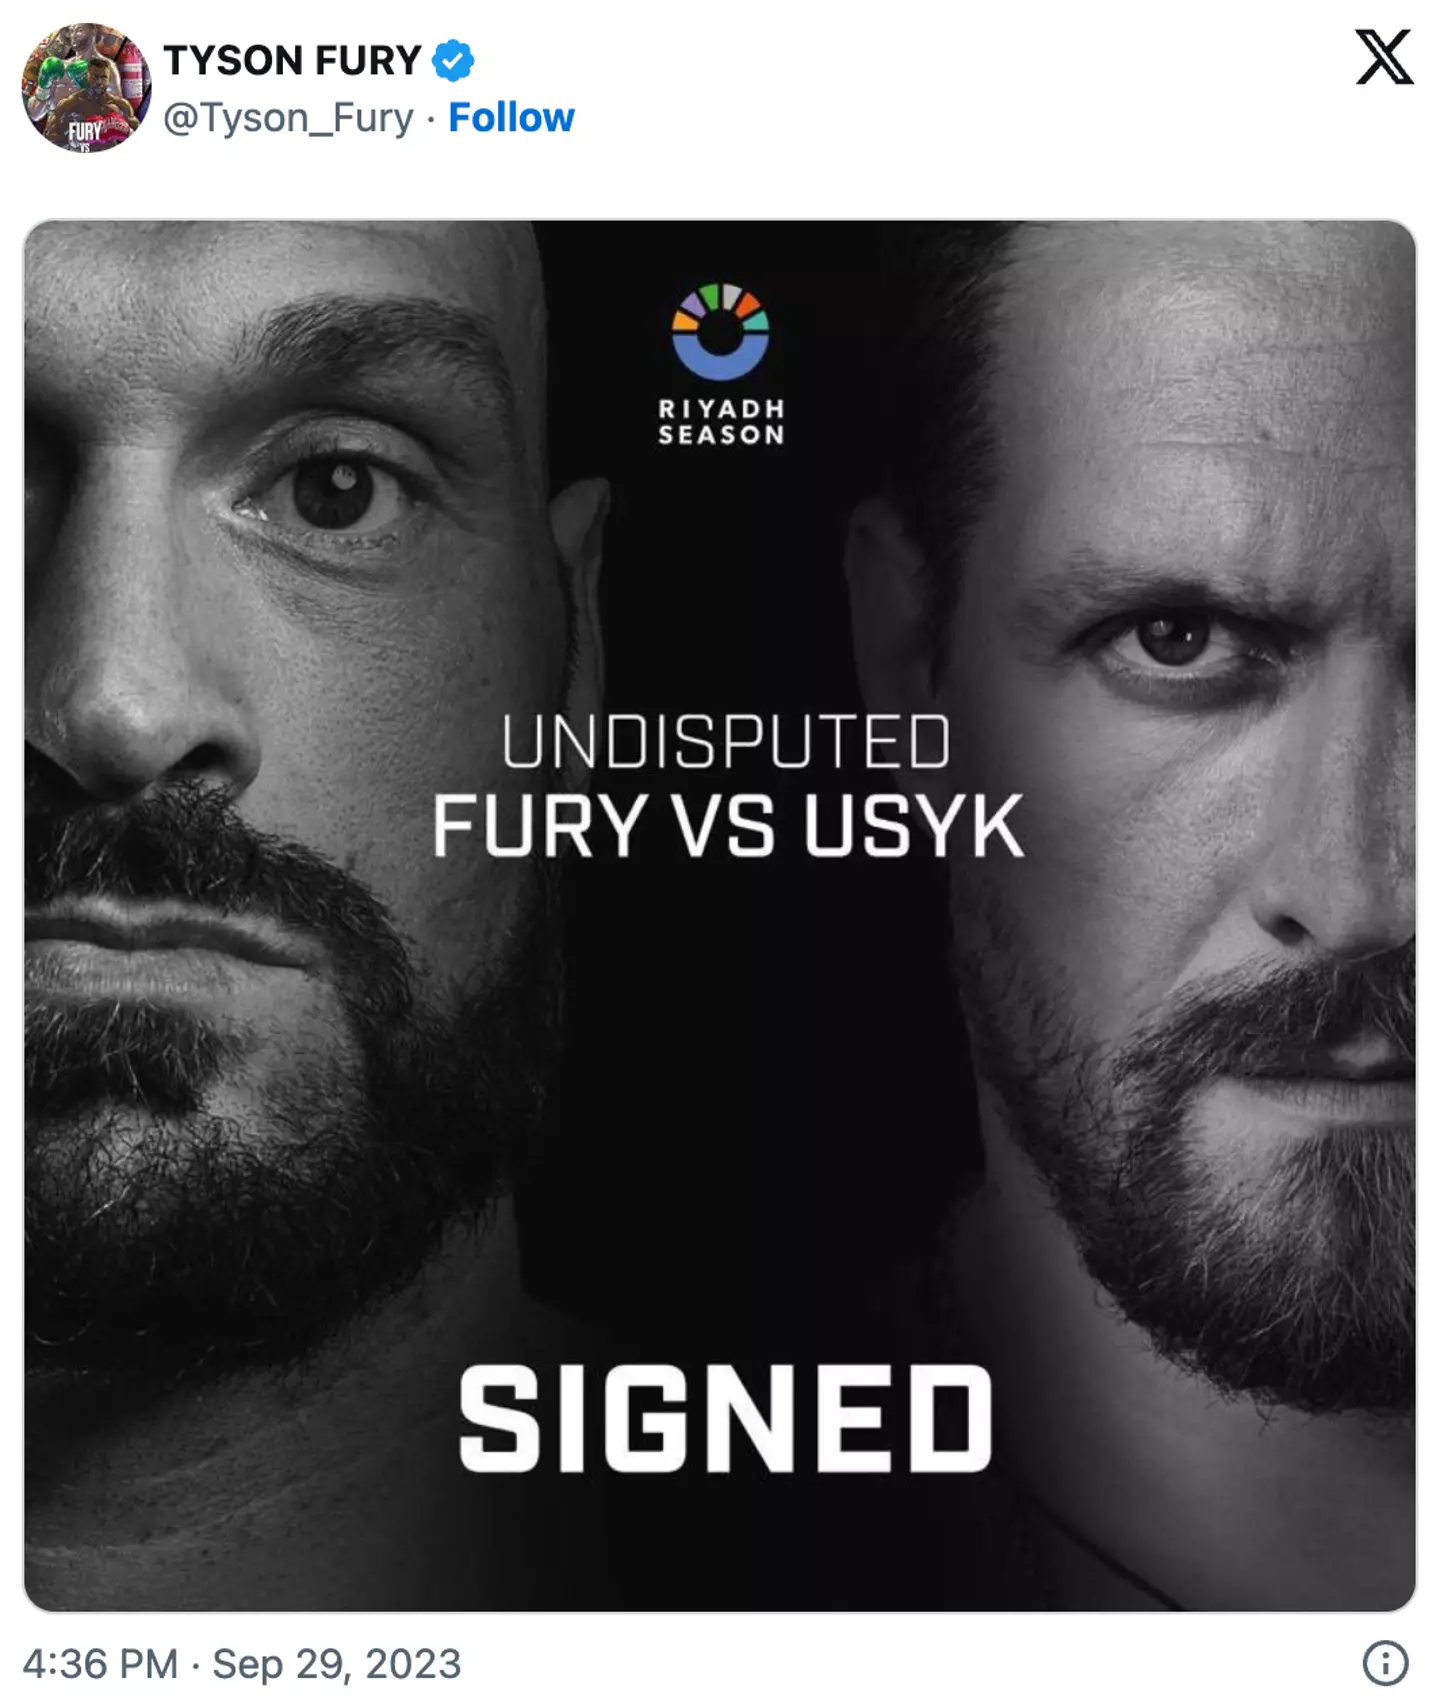 Tyson Fury has signed the contract to fight Oleksandr Usyk.